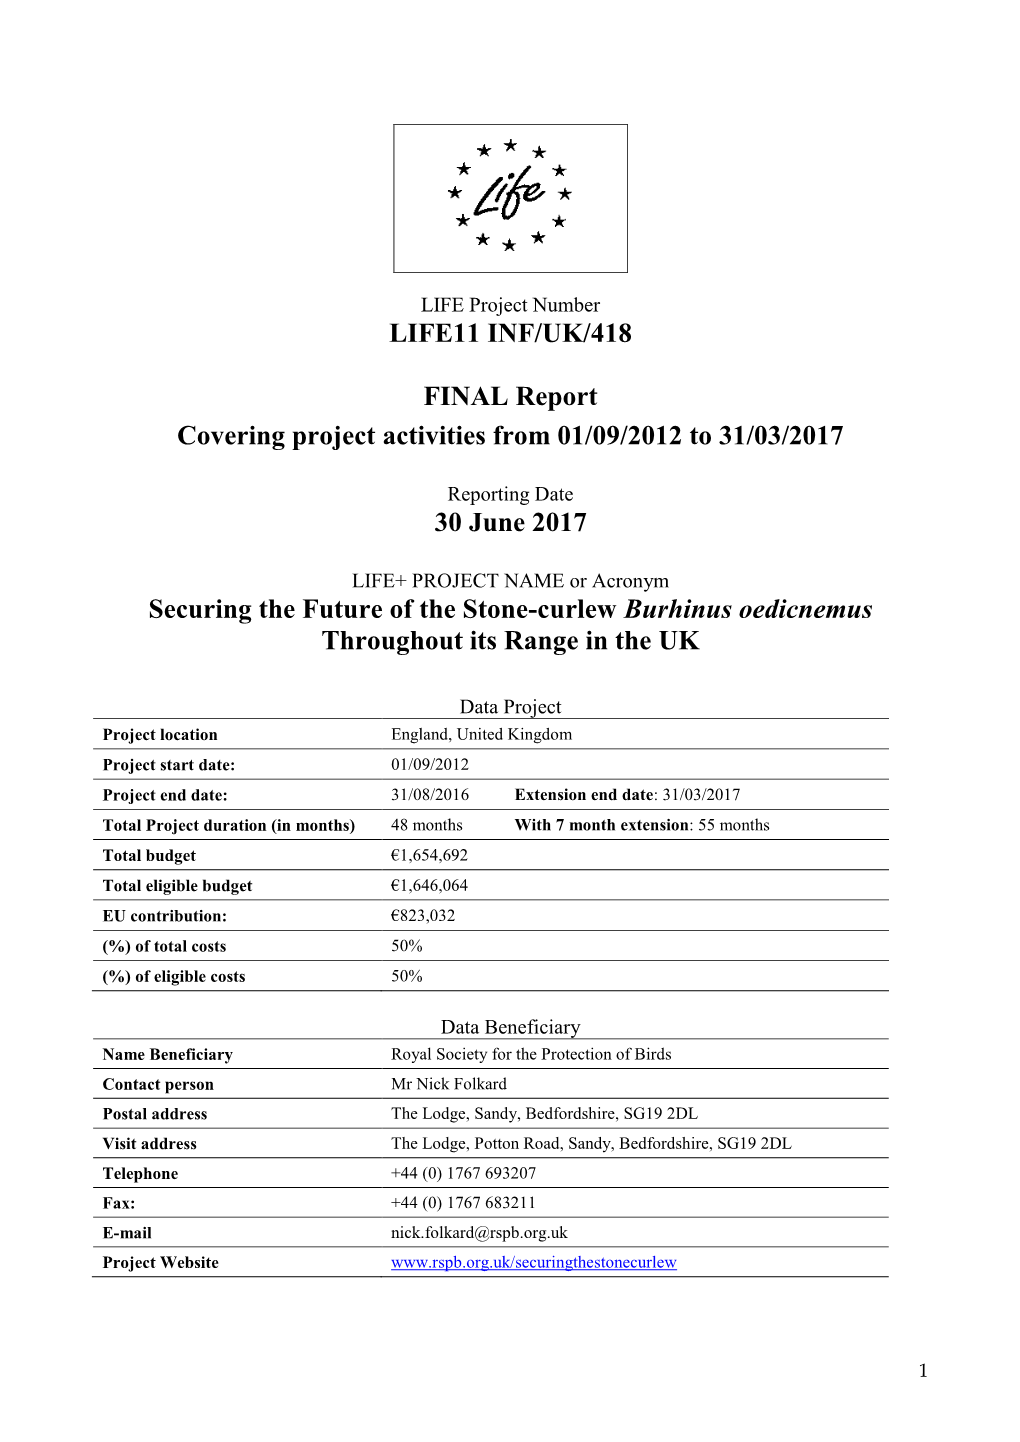 LIFE11 INF/UK/418 FINAL Report Covering Project Activities